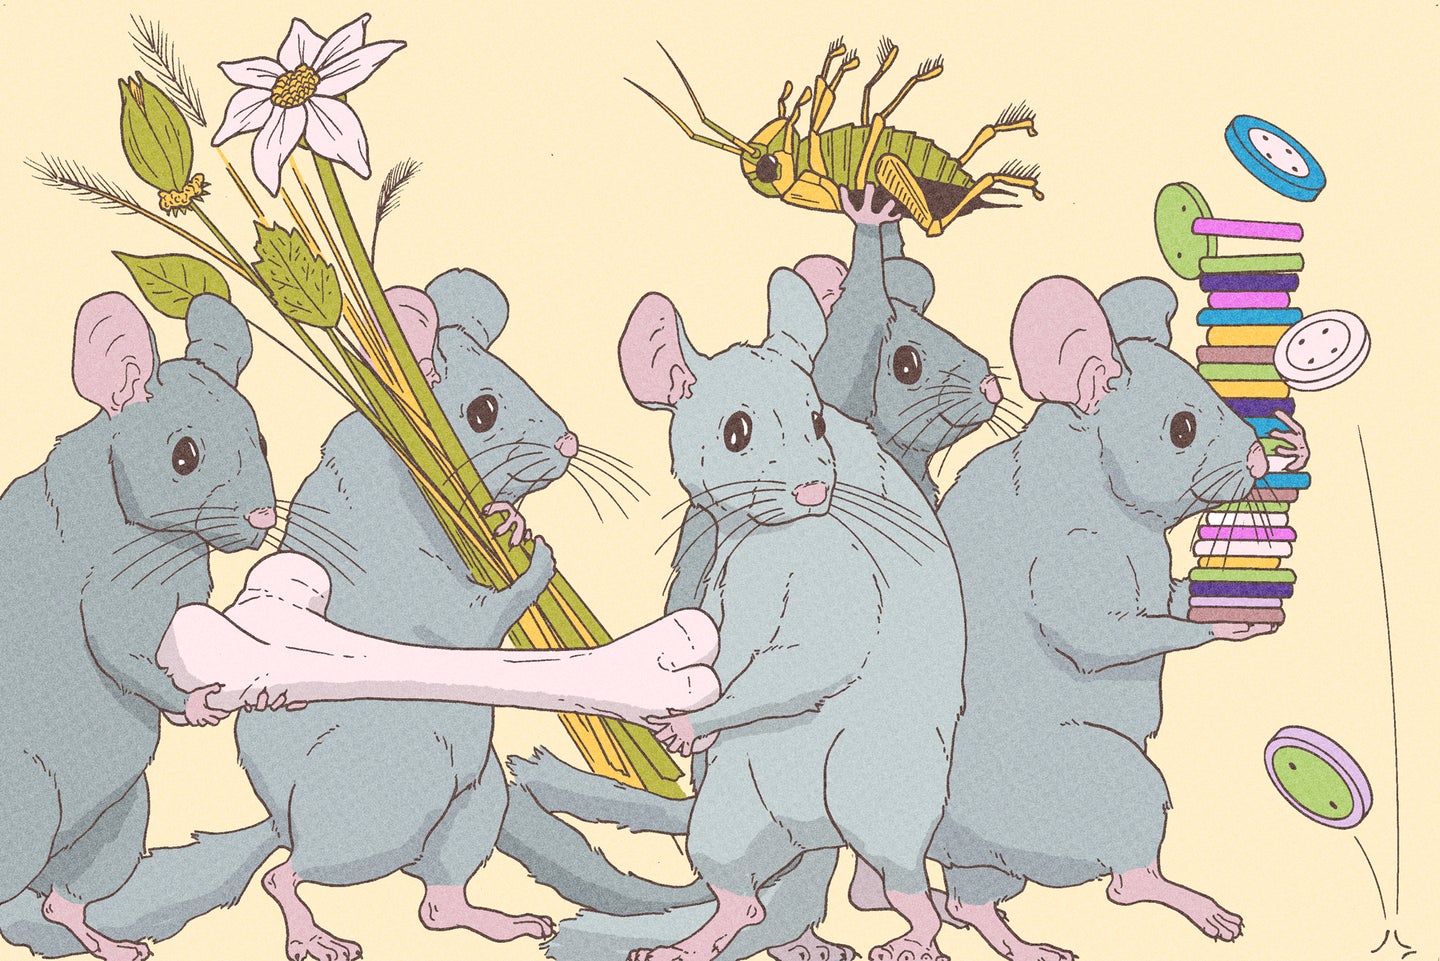 a colorful illustration of long-tailed gray rodents carrying assorted objects such as buttons, bones, bugs, and flowers